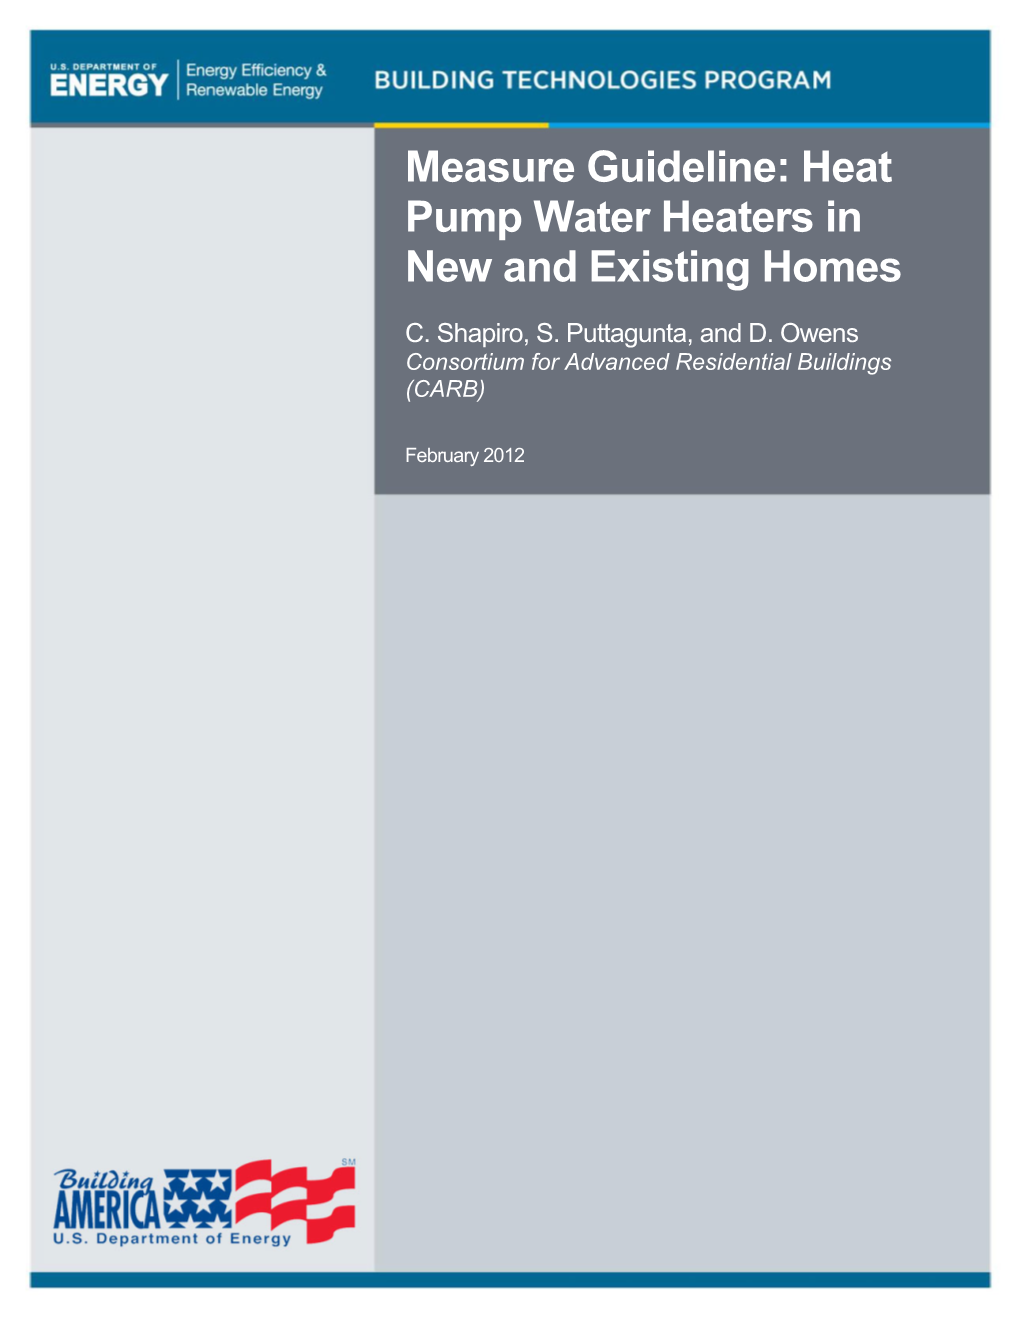 Measure Guideline: Heat Pump Water Heaters in New and Existing Homes